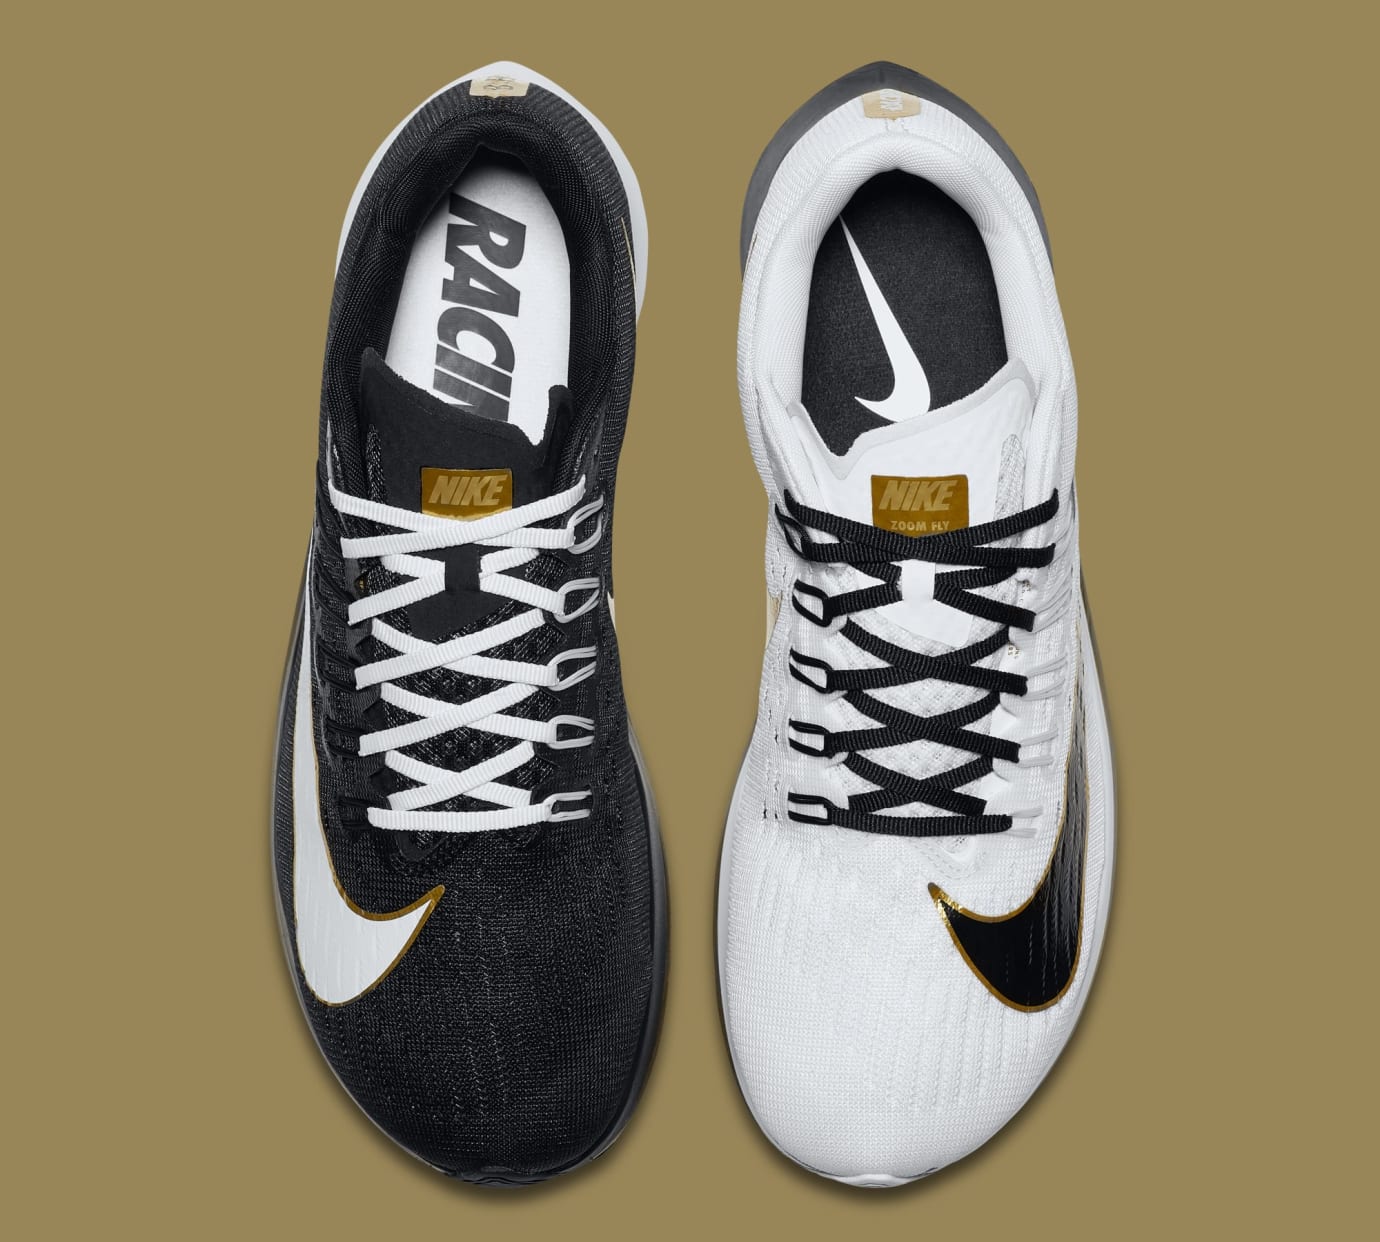 Nike Fly 'Black/Metallic Gold/White' 880848-006 Date | Sole Collector